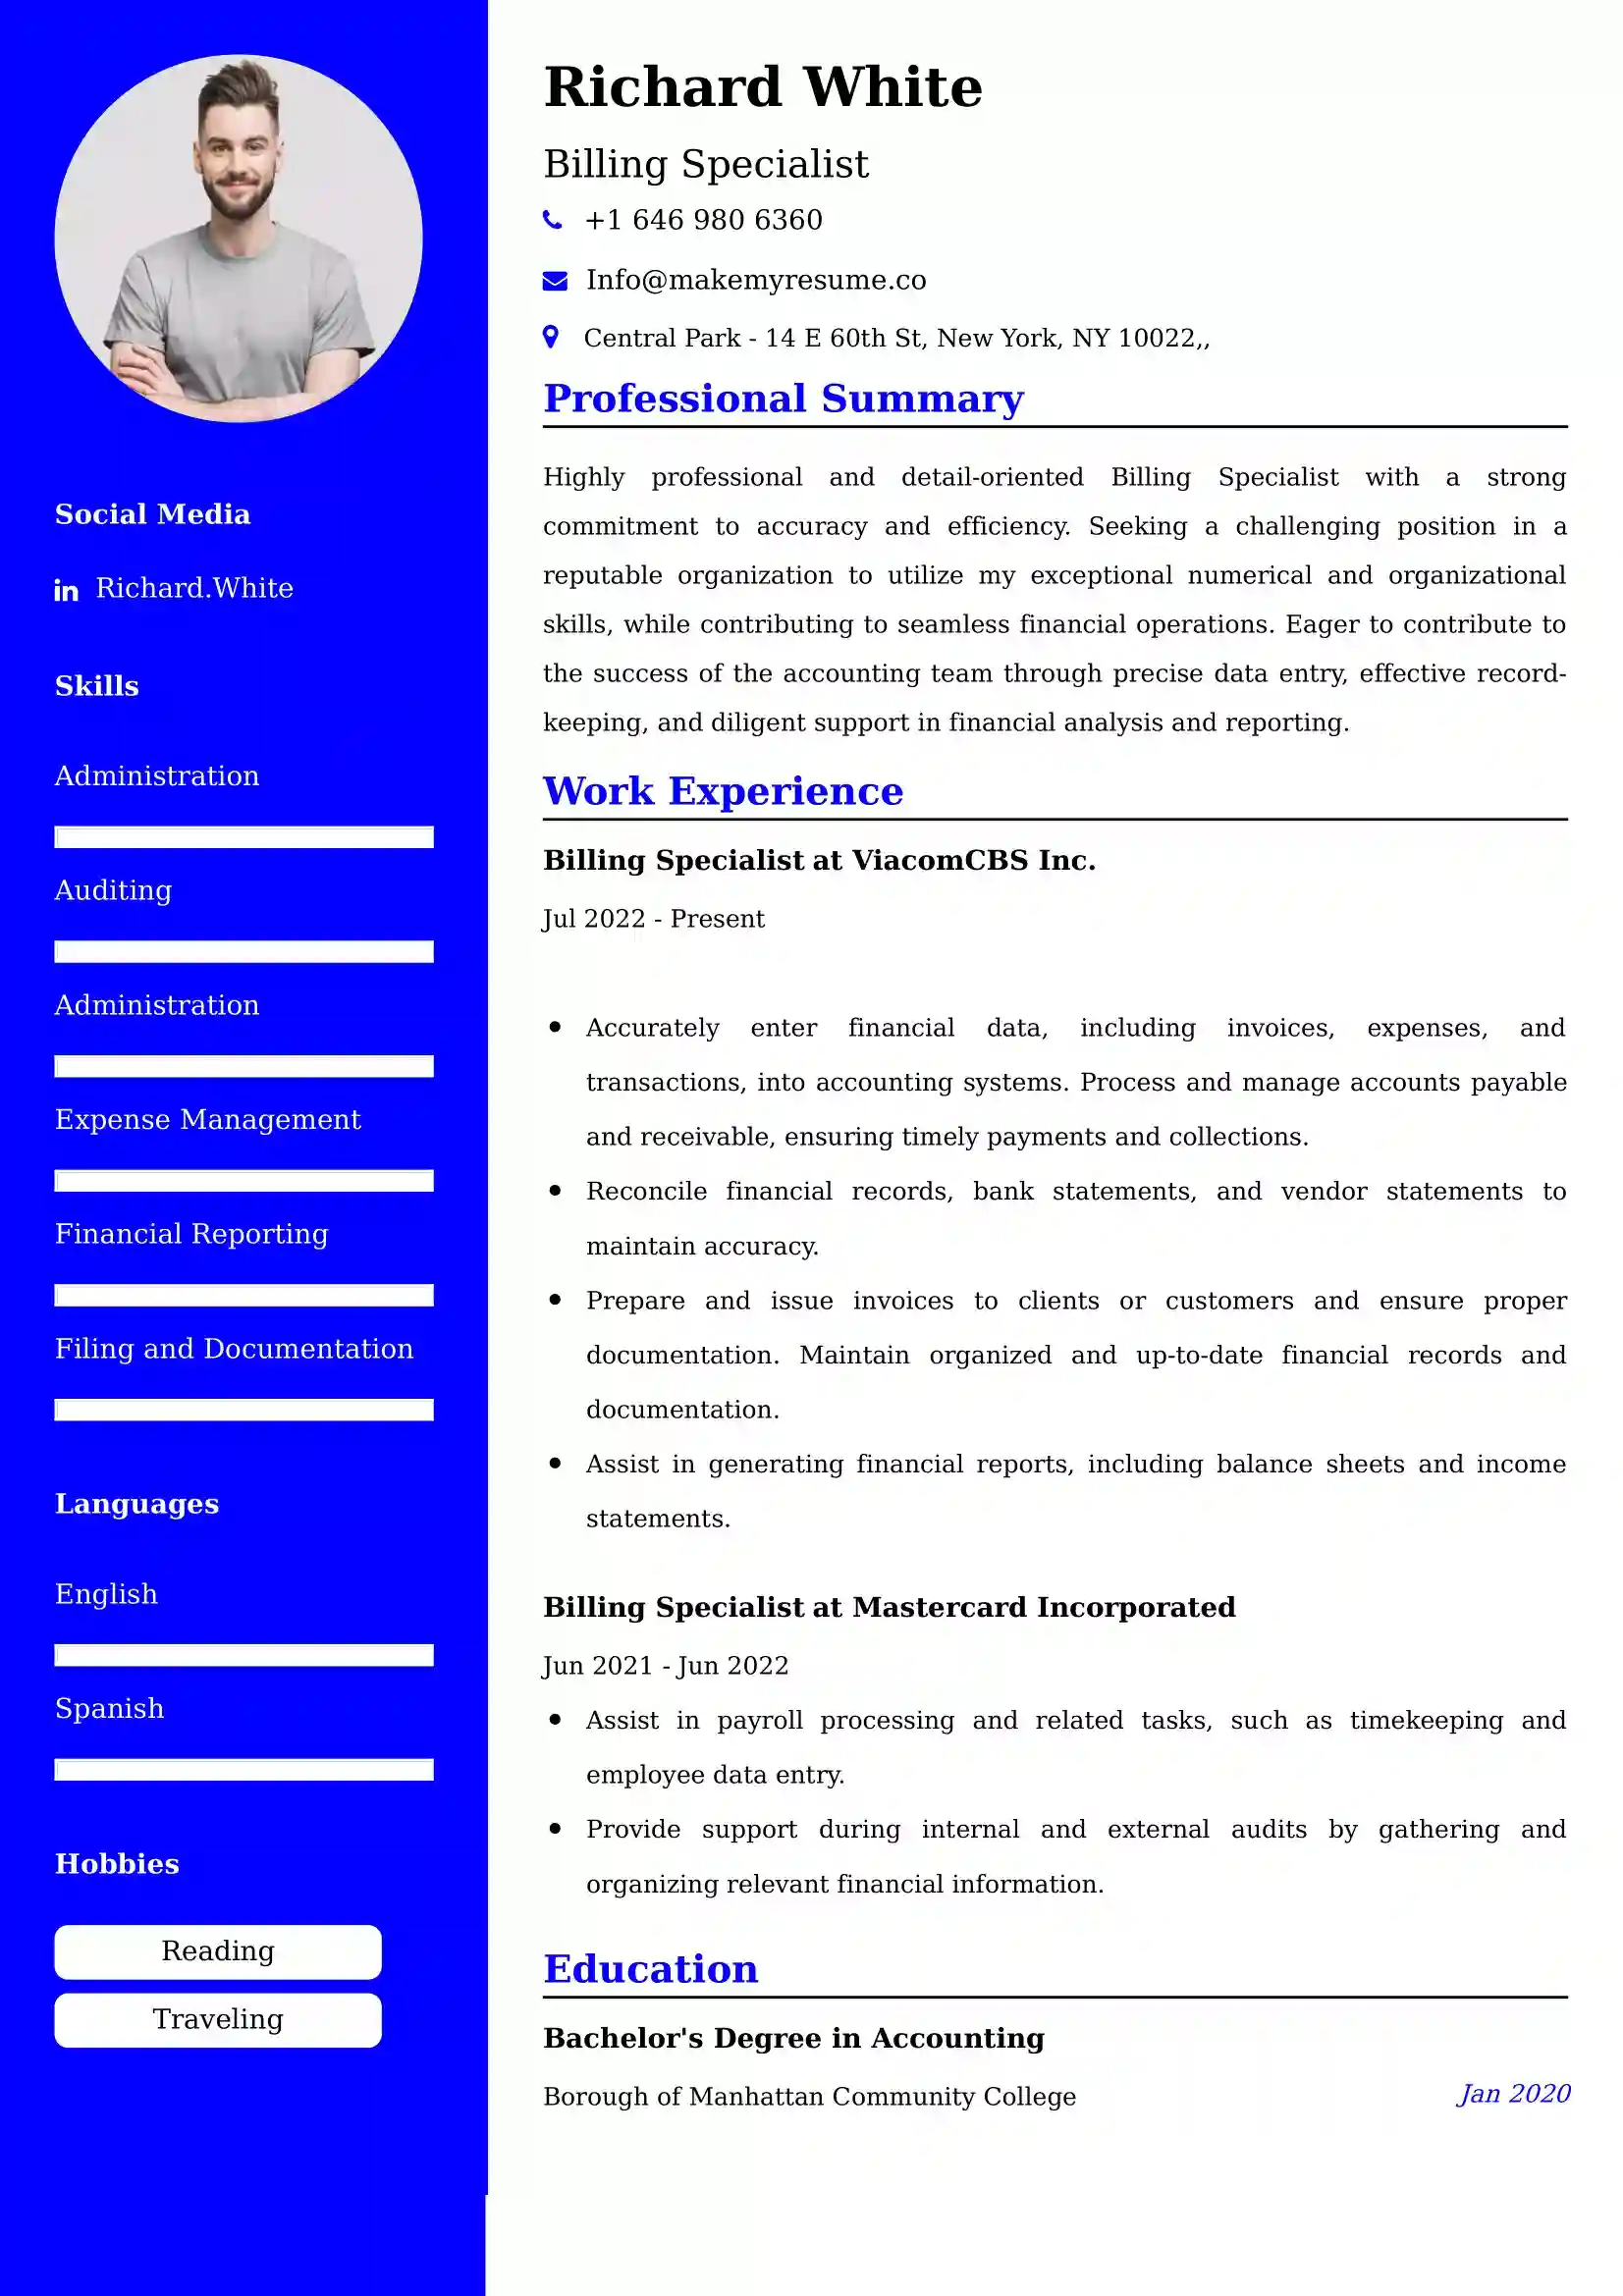 Billing Specialist Resume Examples - UK Format, Latest Template.